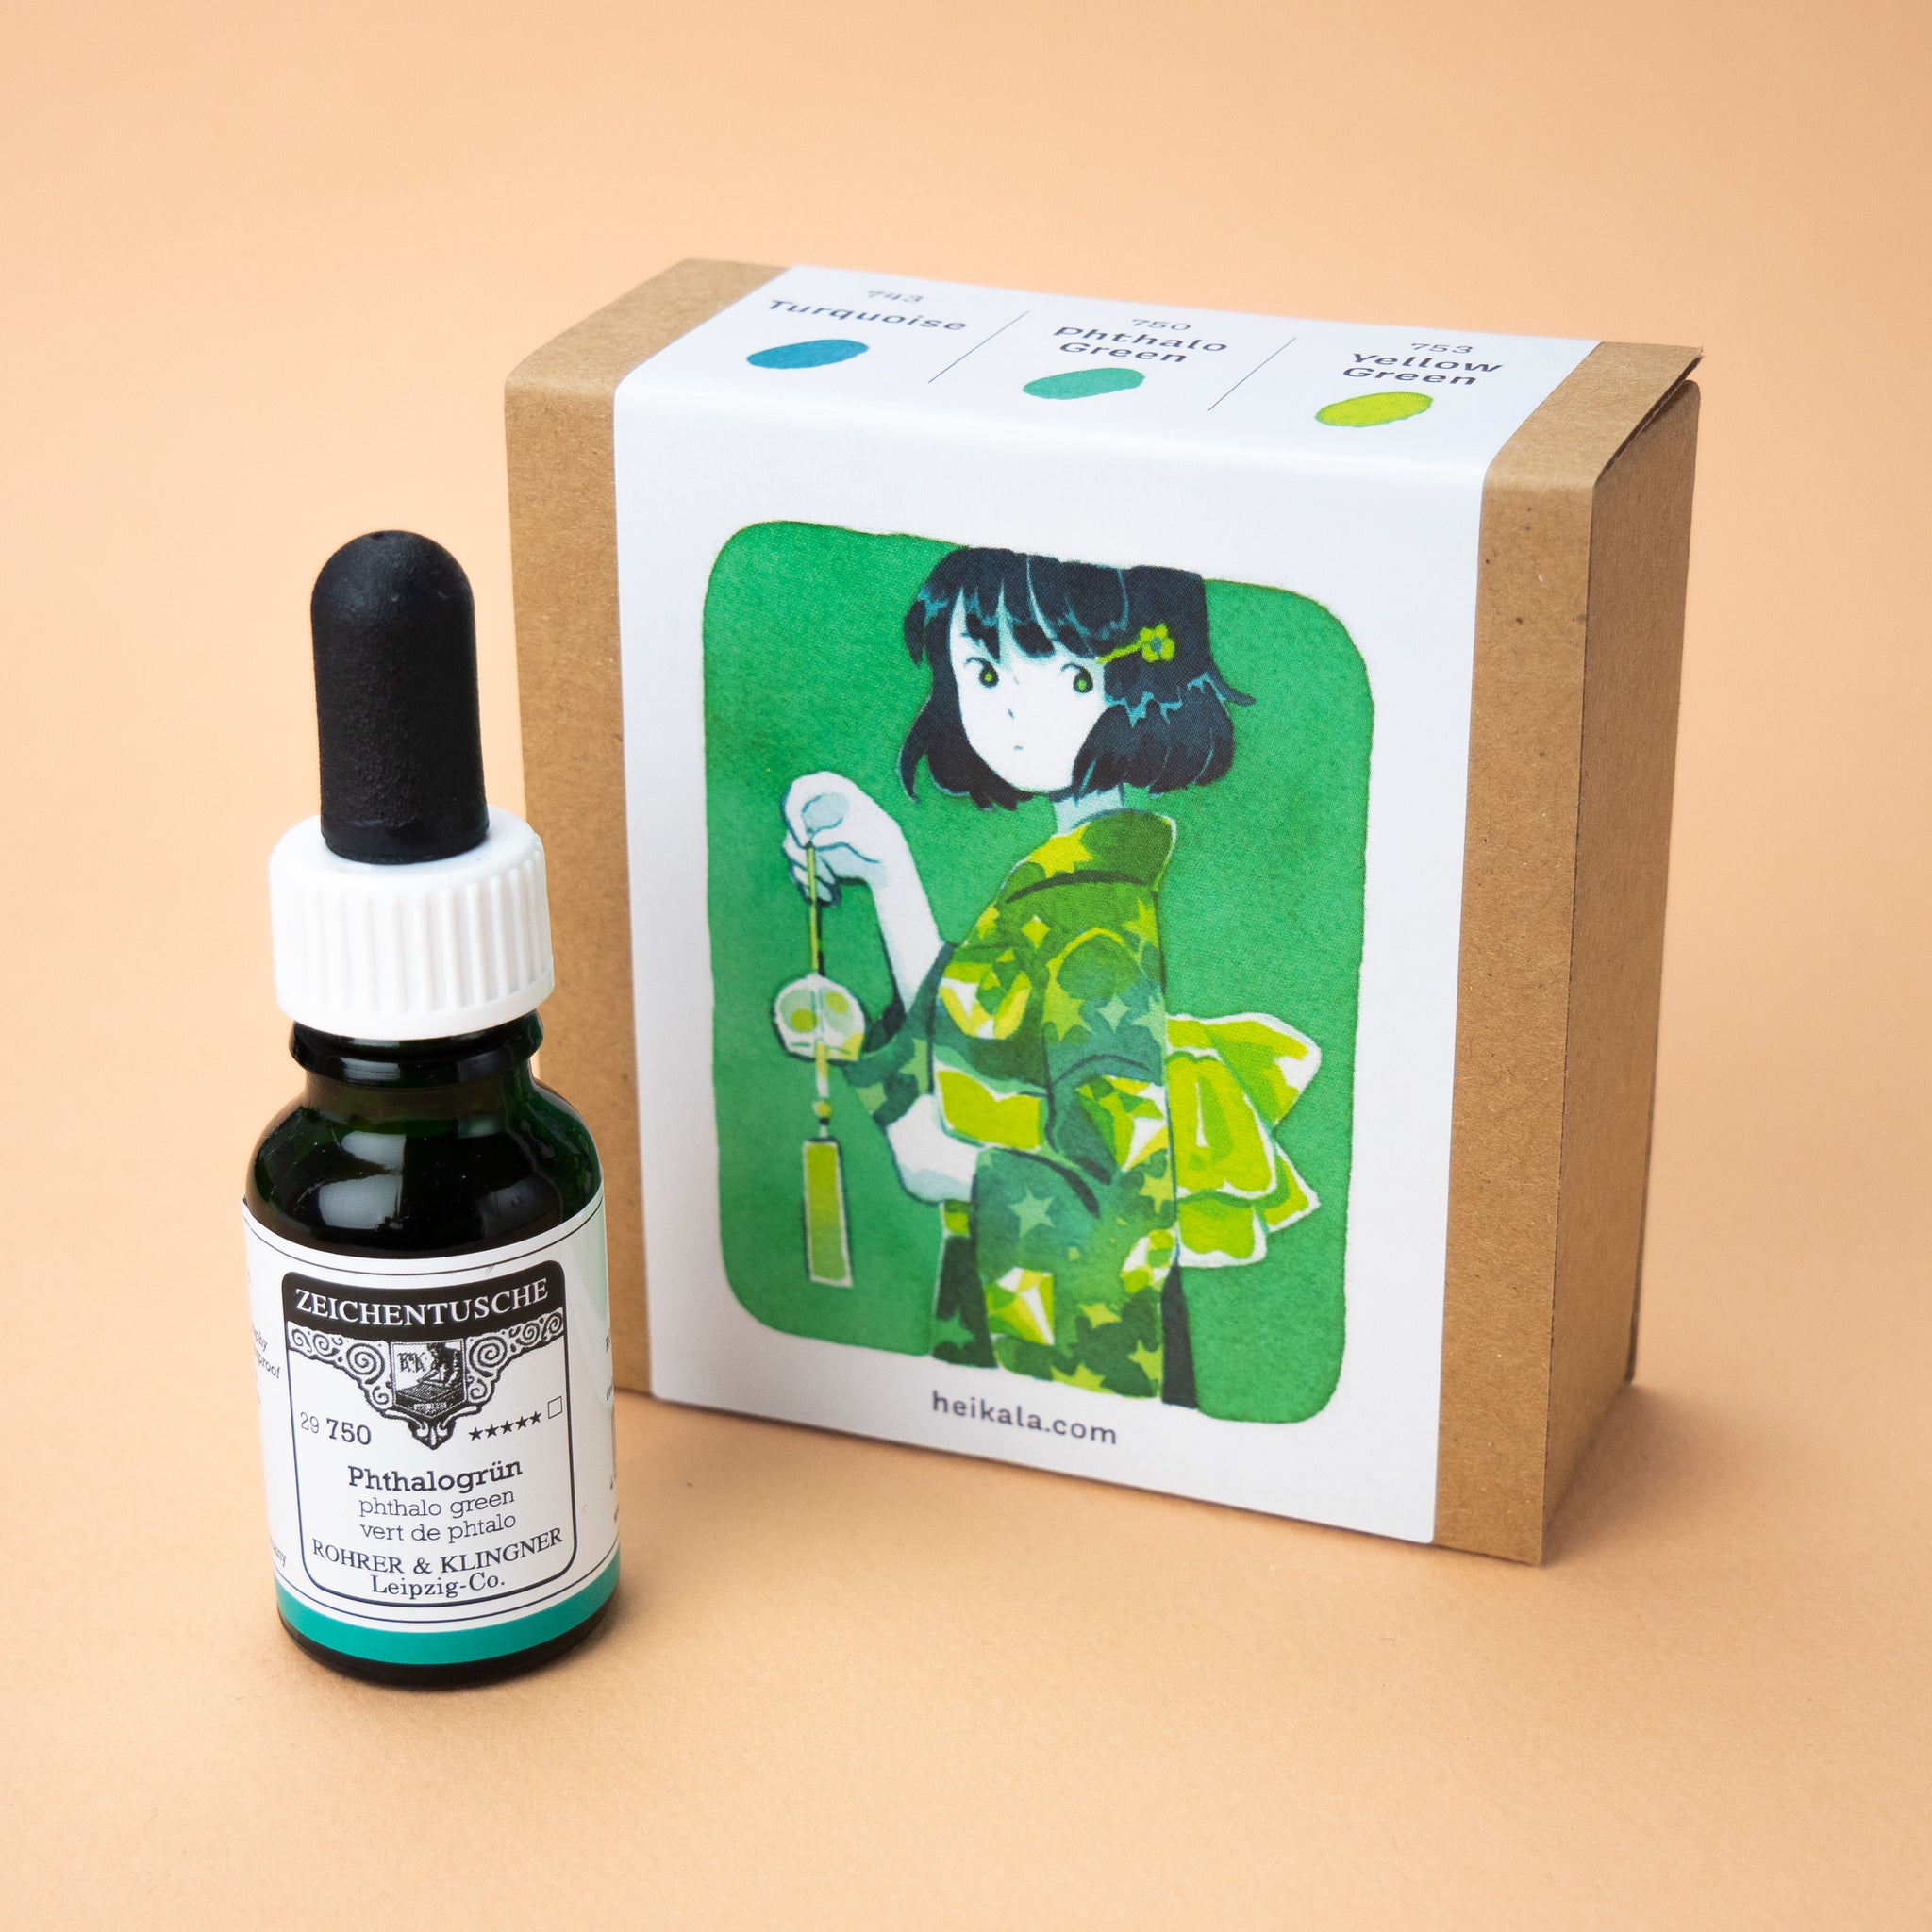 A photo of the Gem Greens ink set in its box and single bottle of the color phthalo green next to it. The label on the box is a painting depicting character wearing a green yukata holding a glass wind chime.